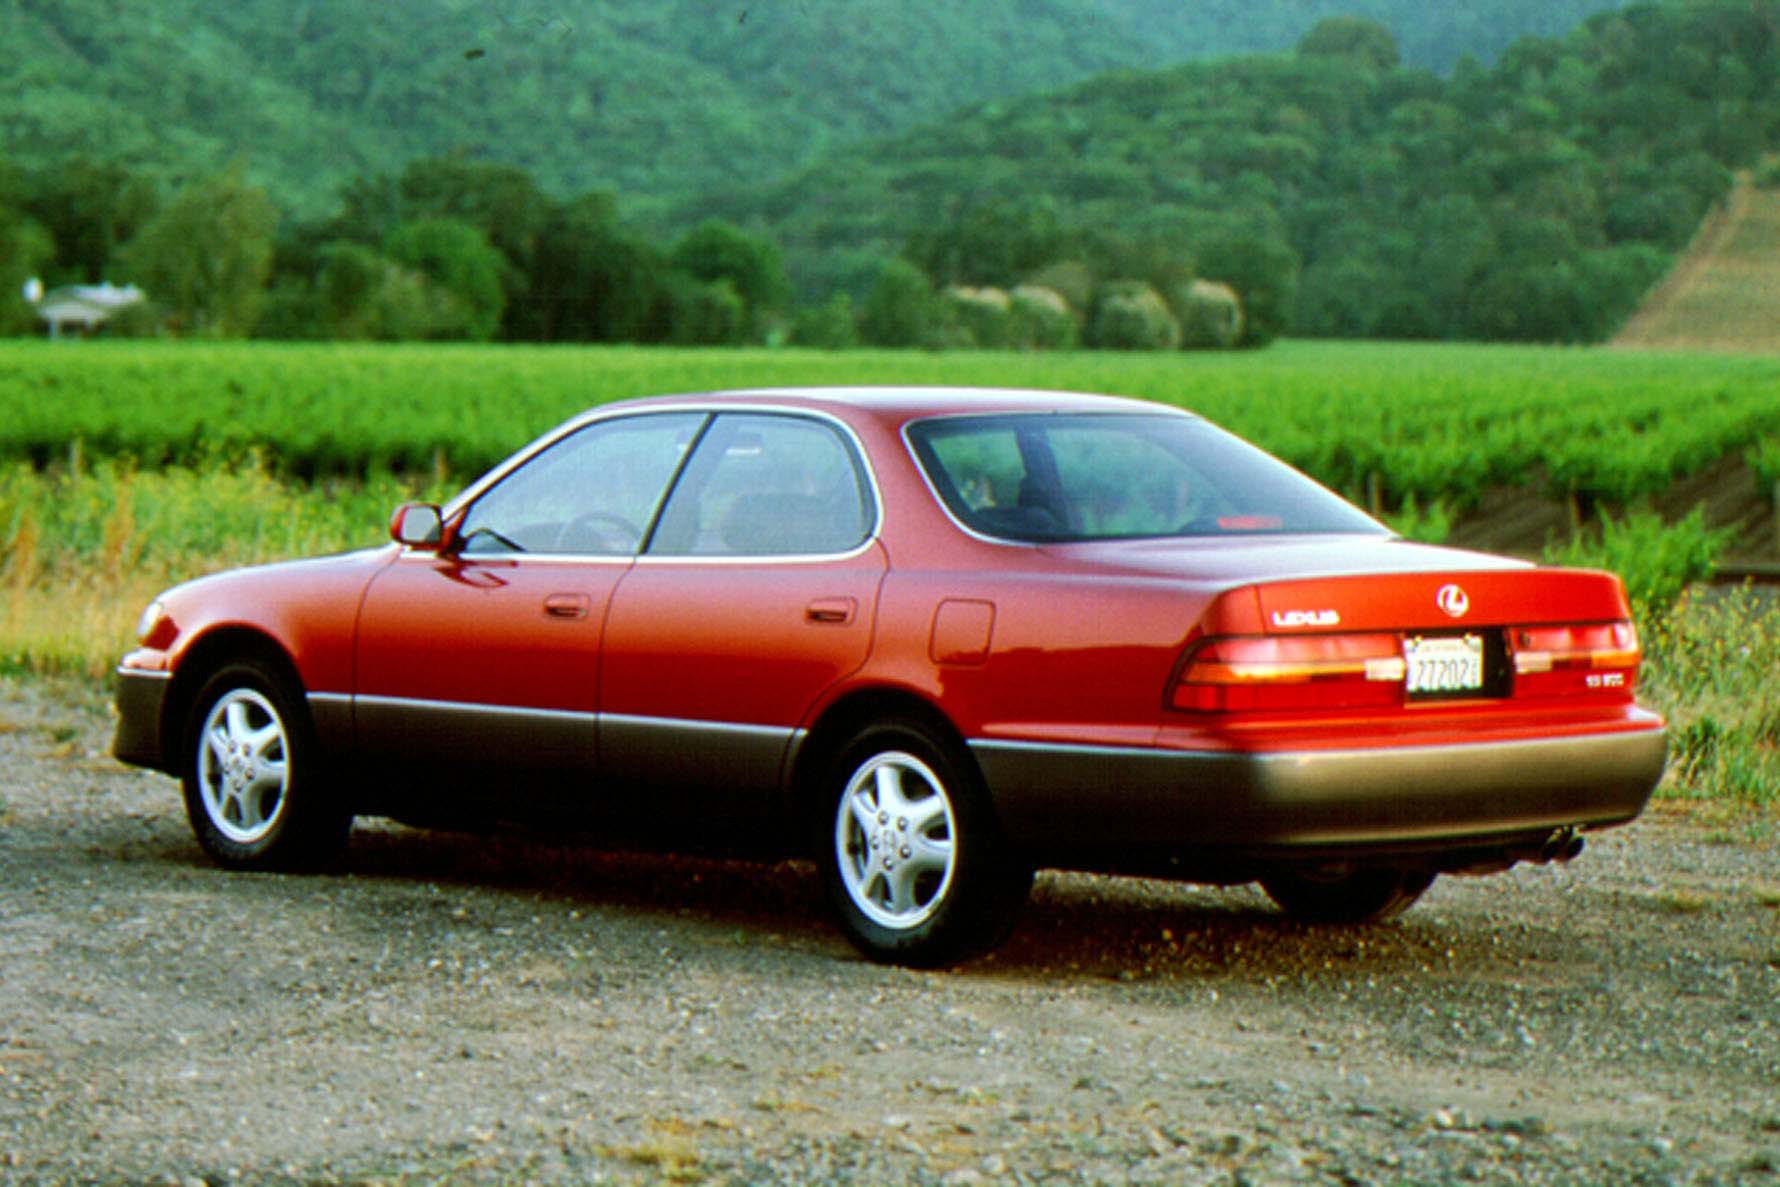 Essentially, the ES350 was a rebadged Camry: front-wheel-drive, 3.0L V6, lots of leather. That's not exactly groundbreaking stuff, but it was what the customer wanted, a proven and reliable ride with a slightly more advanced suspension, quieter ride, and modestly more upscale feel.